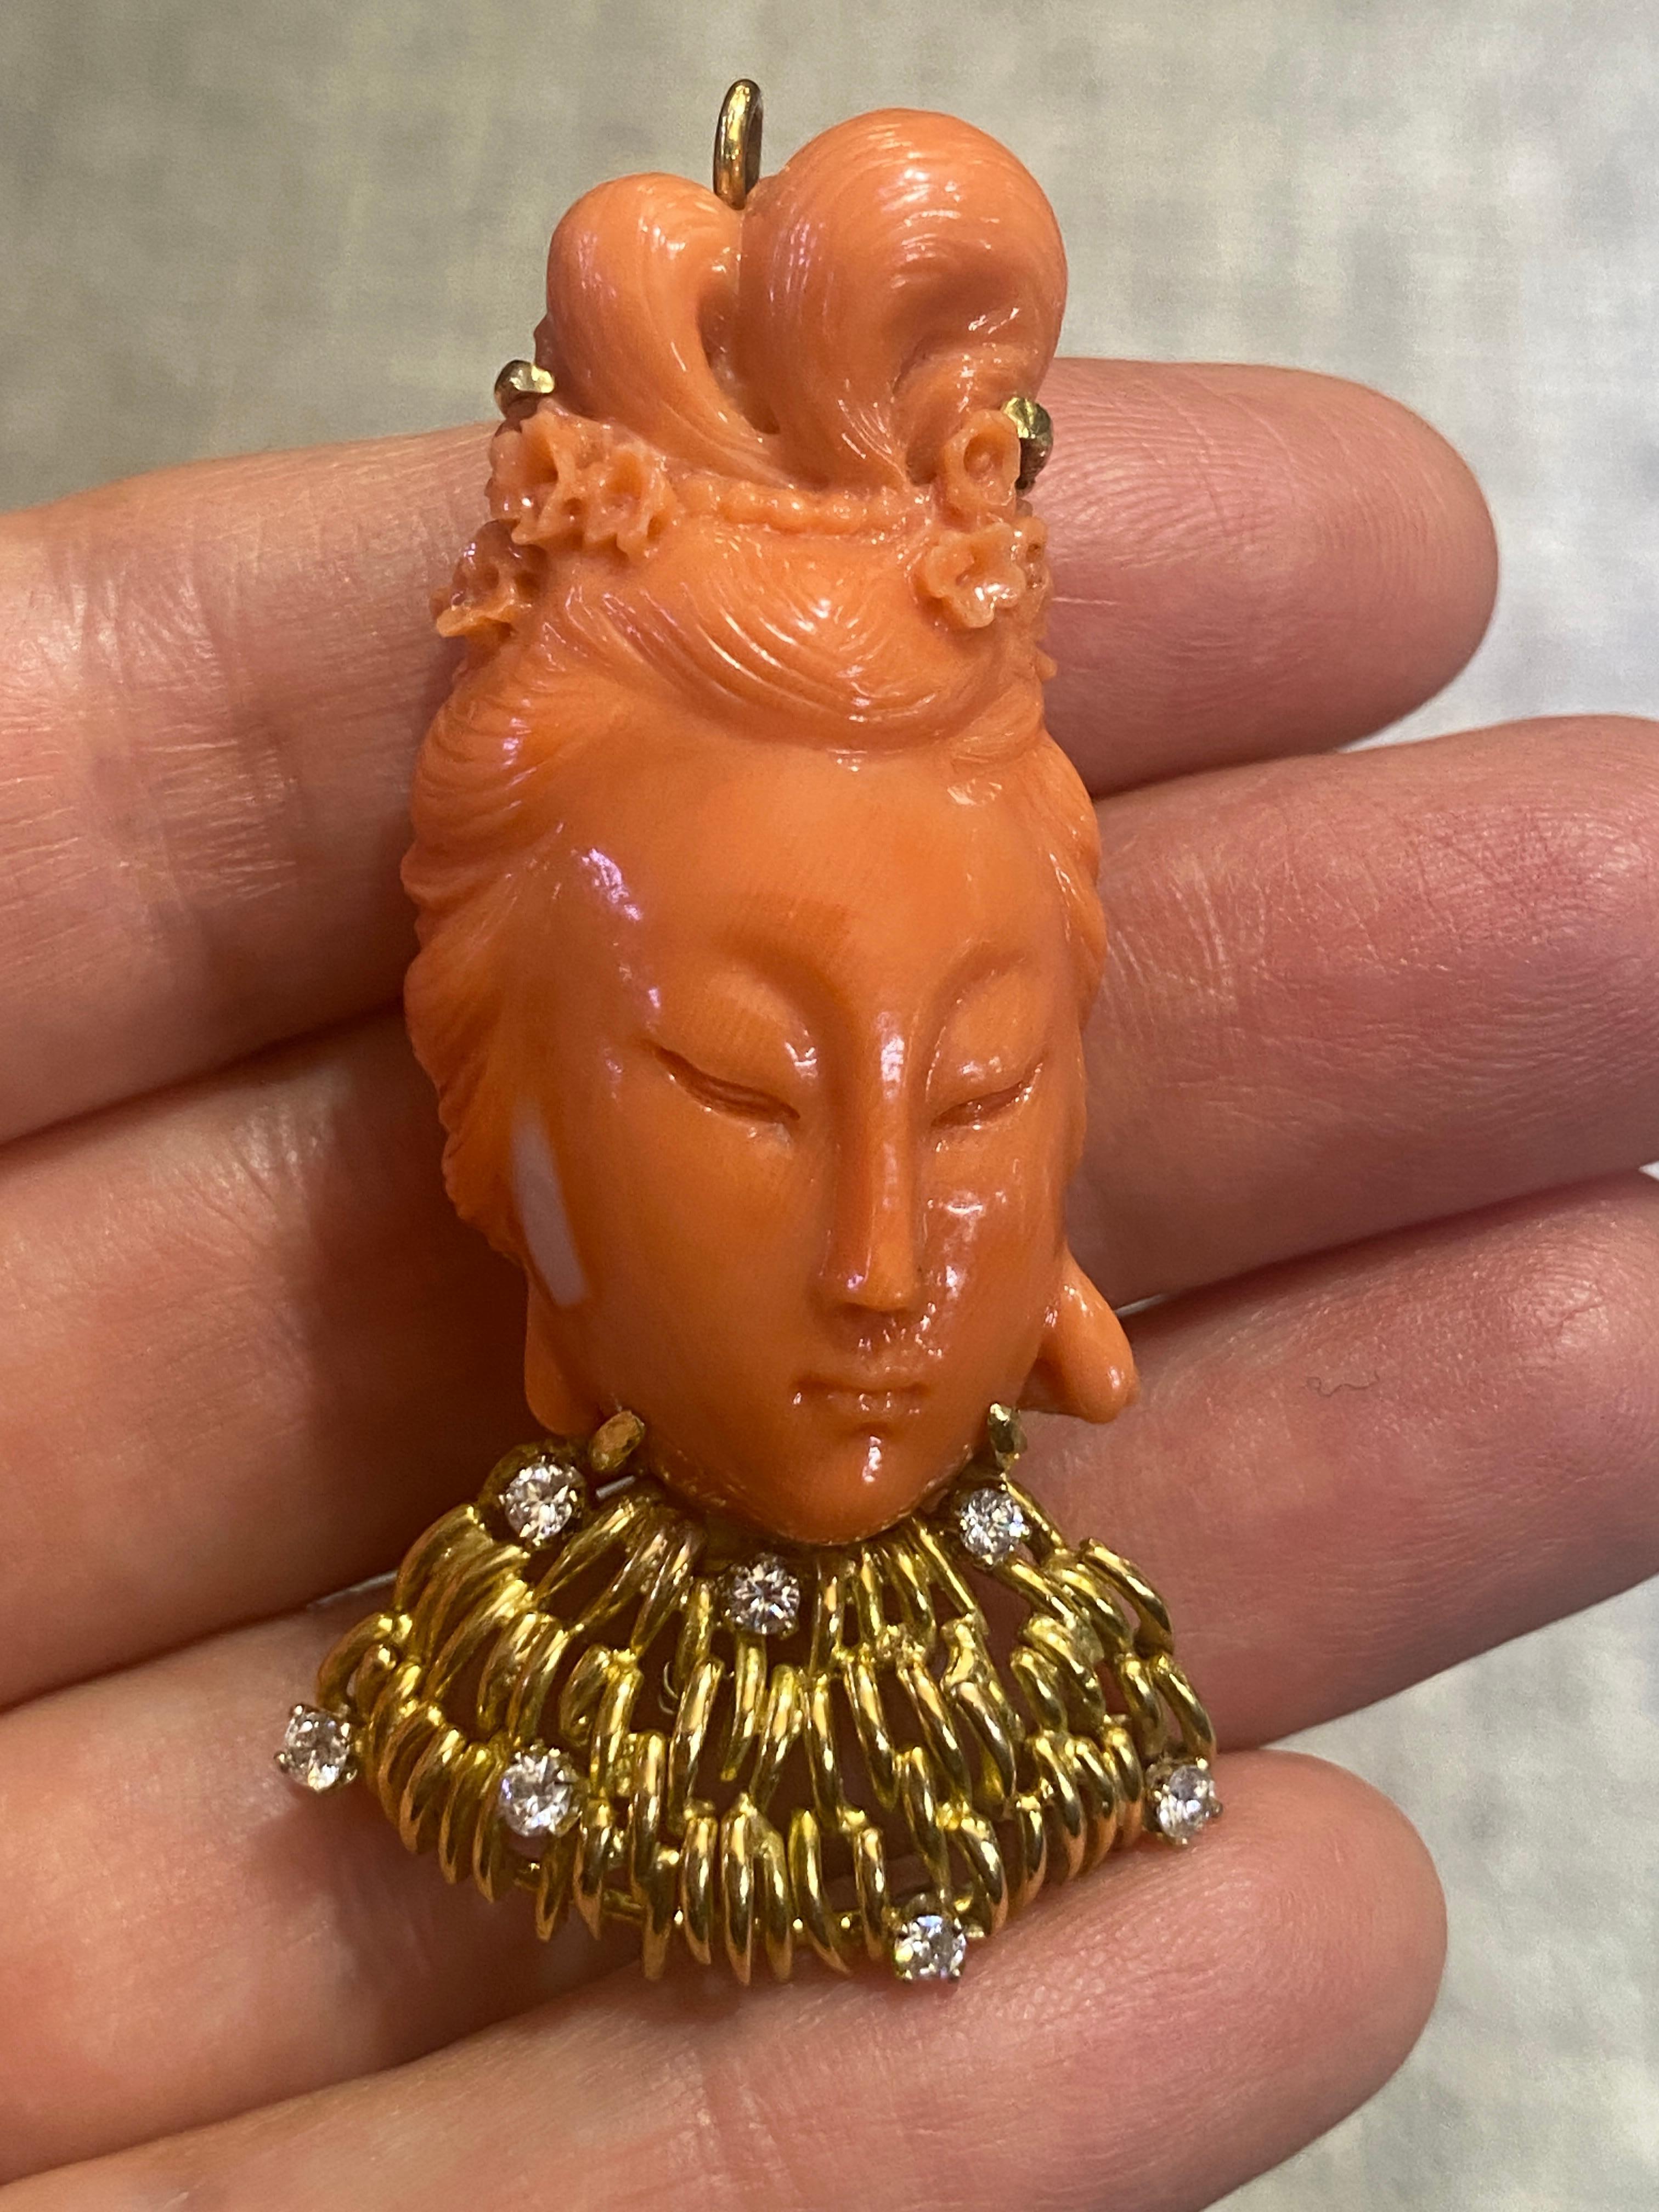 This beautiful carved coral lady Buddha brooch has a delicately carved hair bun adorned with pearls and small flowers. The collar is made of 14k gold embellished with 7 round cut diamonds totalling approximately 0.35 carats. The brooch also has a